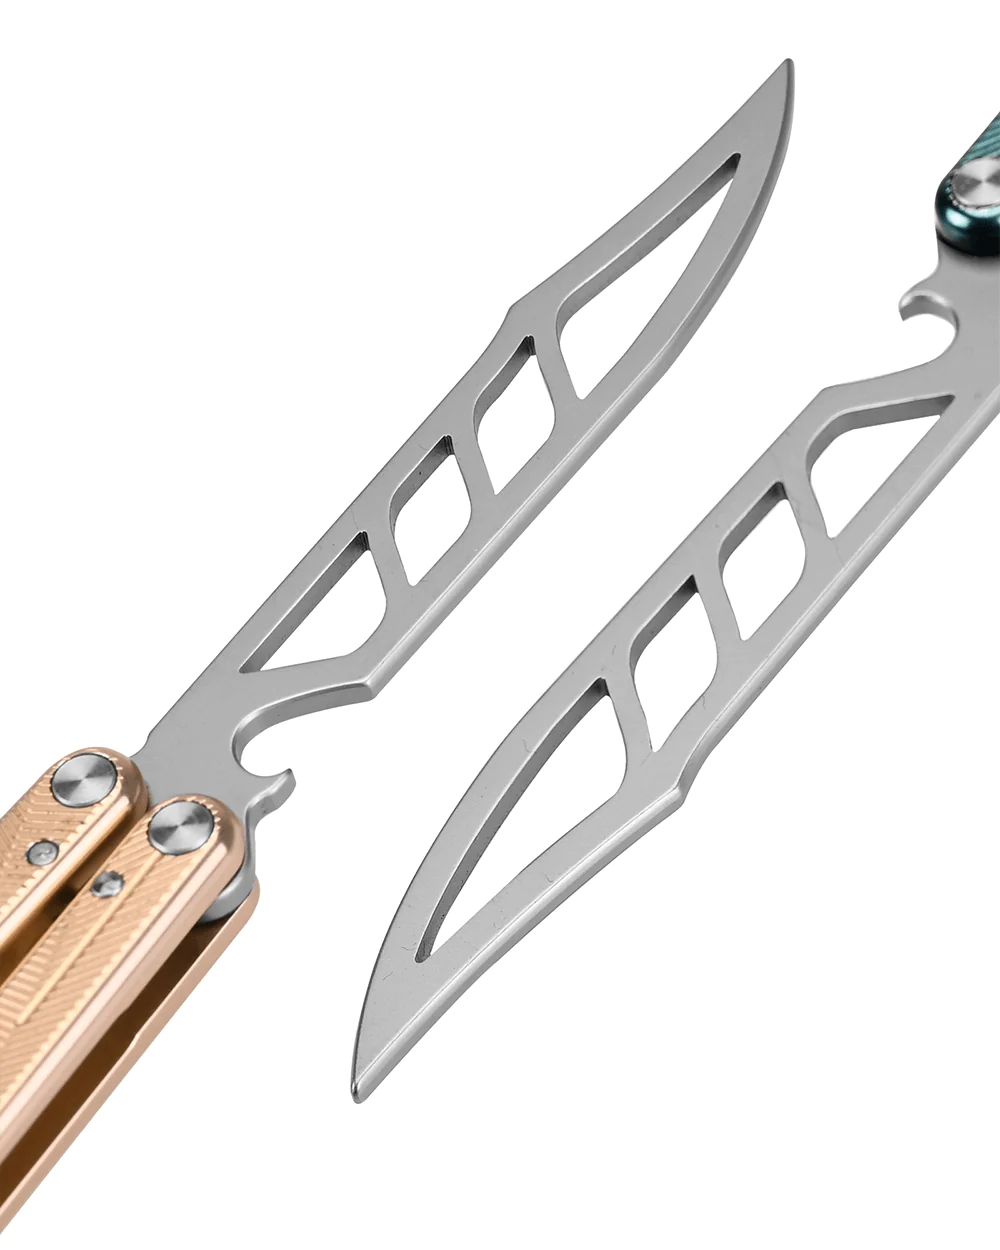 nabalis_butterfly_knives_hydra-with-bottle-opener-balde details-1